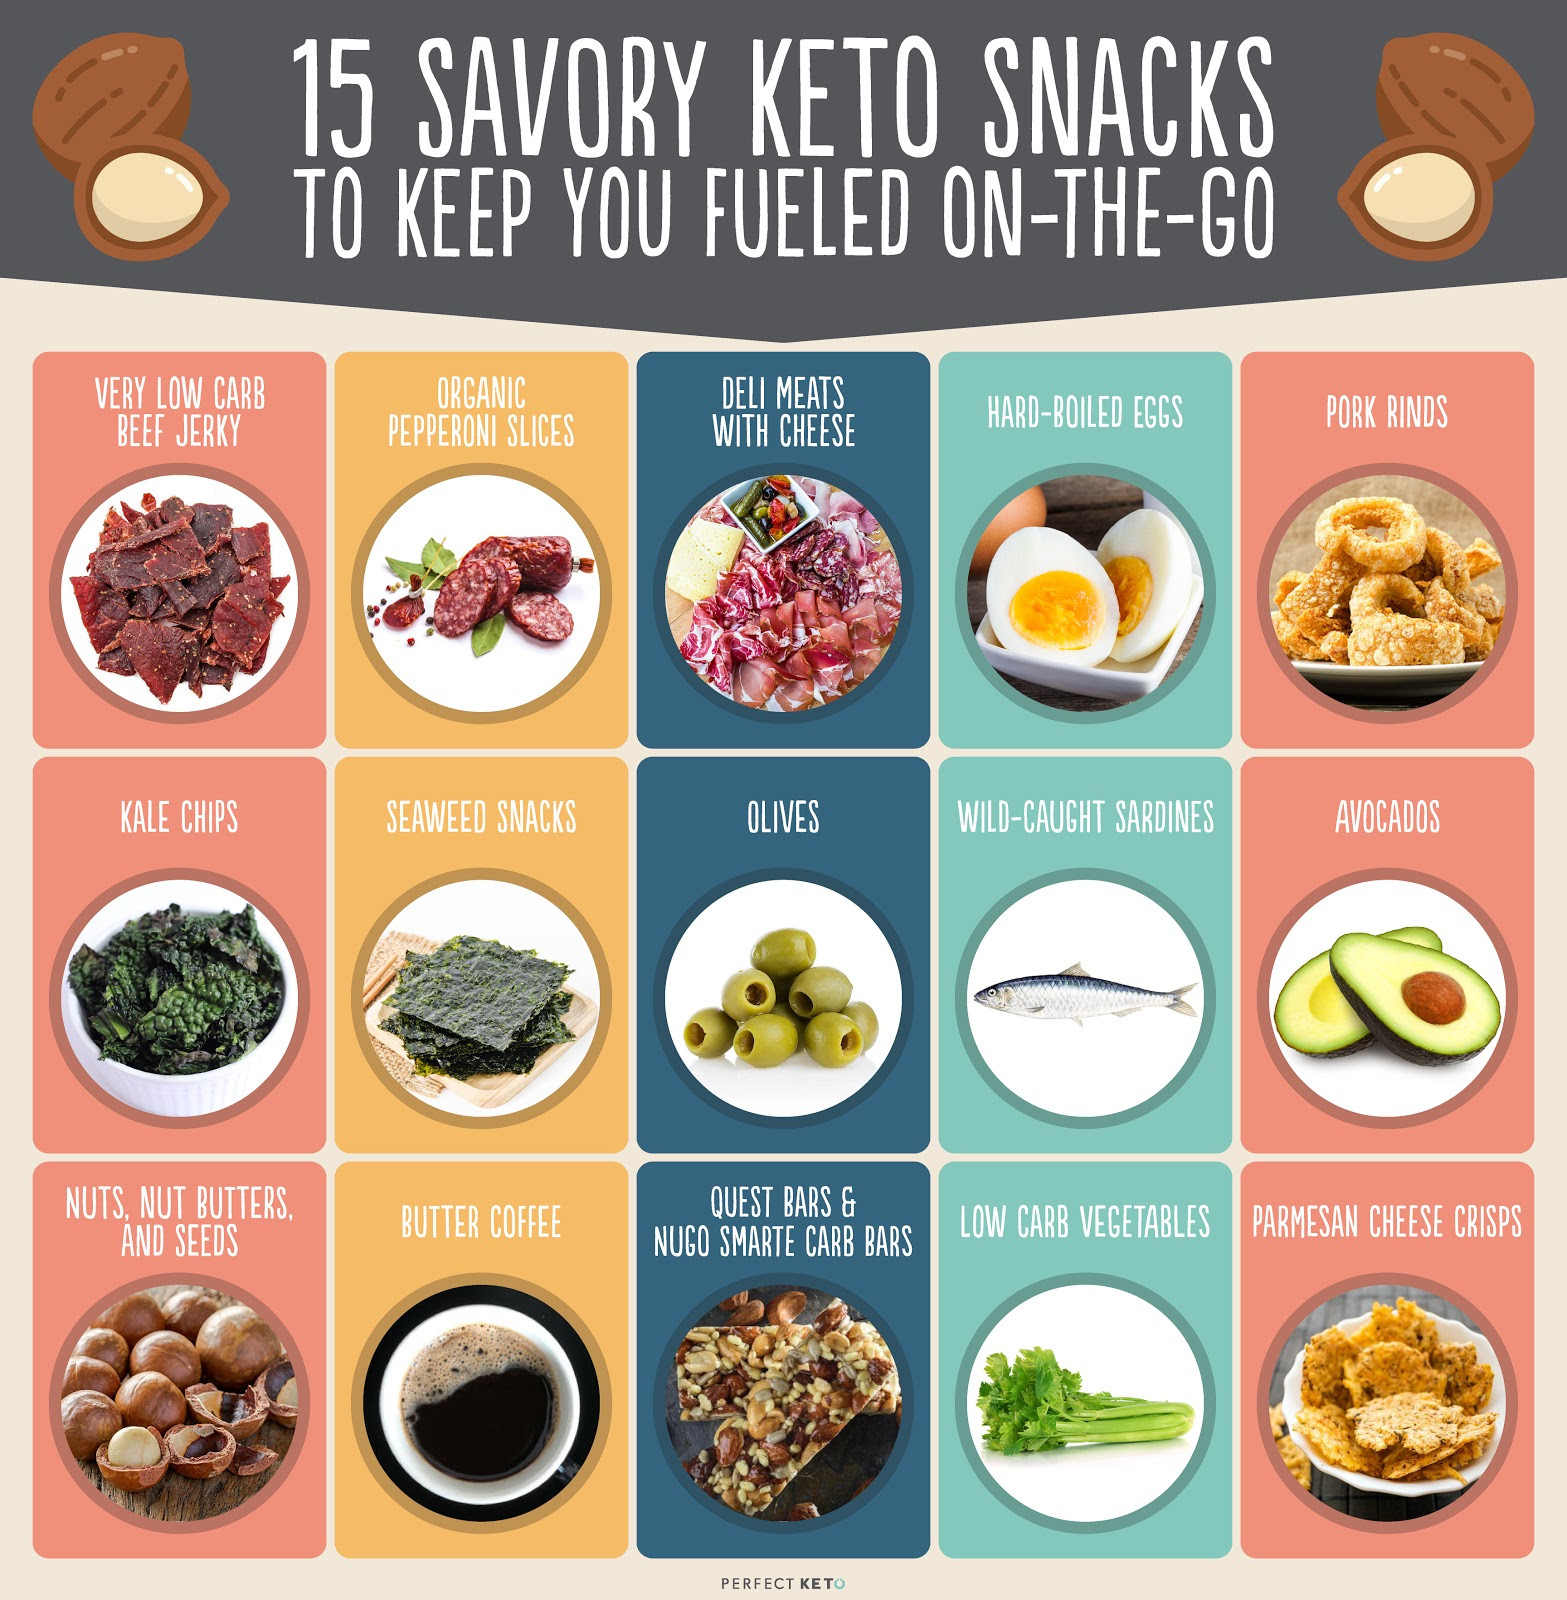 Clean Keto Snacks Easy
 20 Best Store Bought Keto Snacks Reviews and Guide